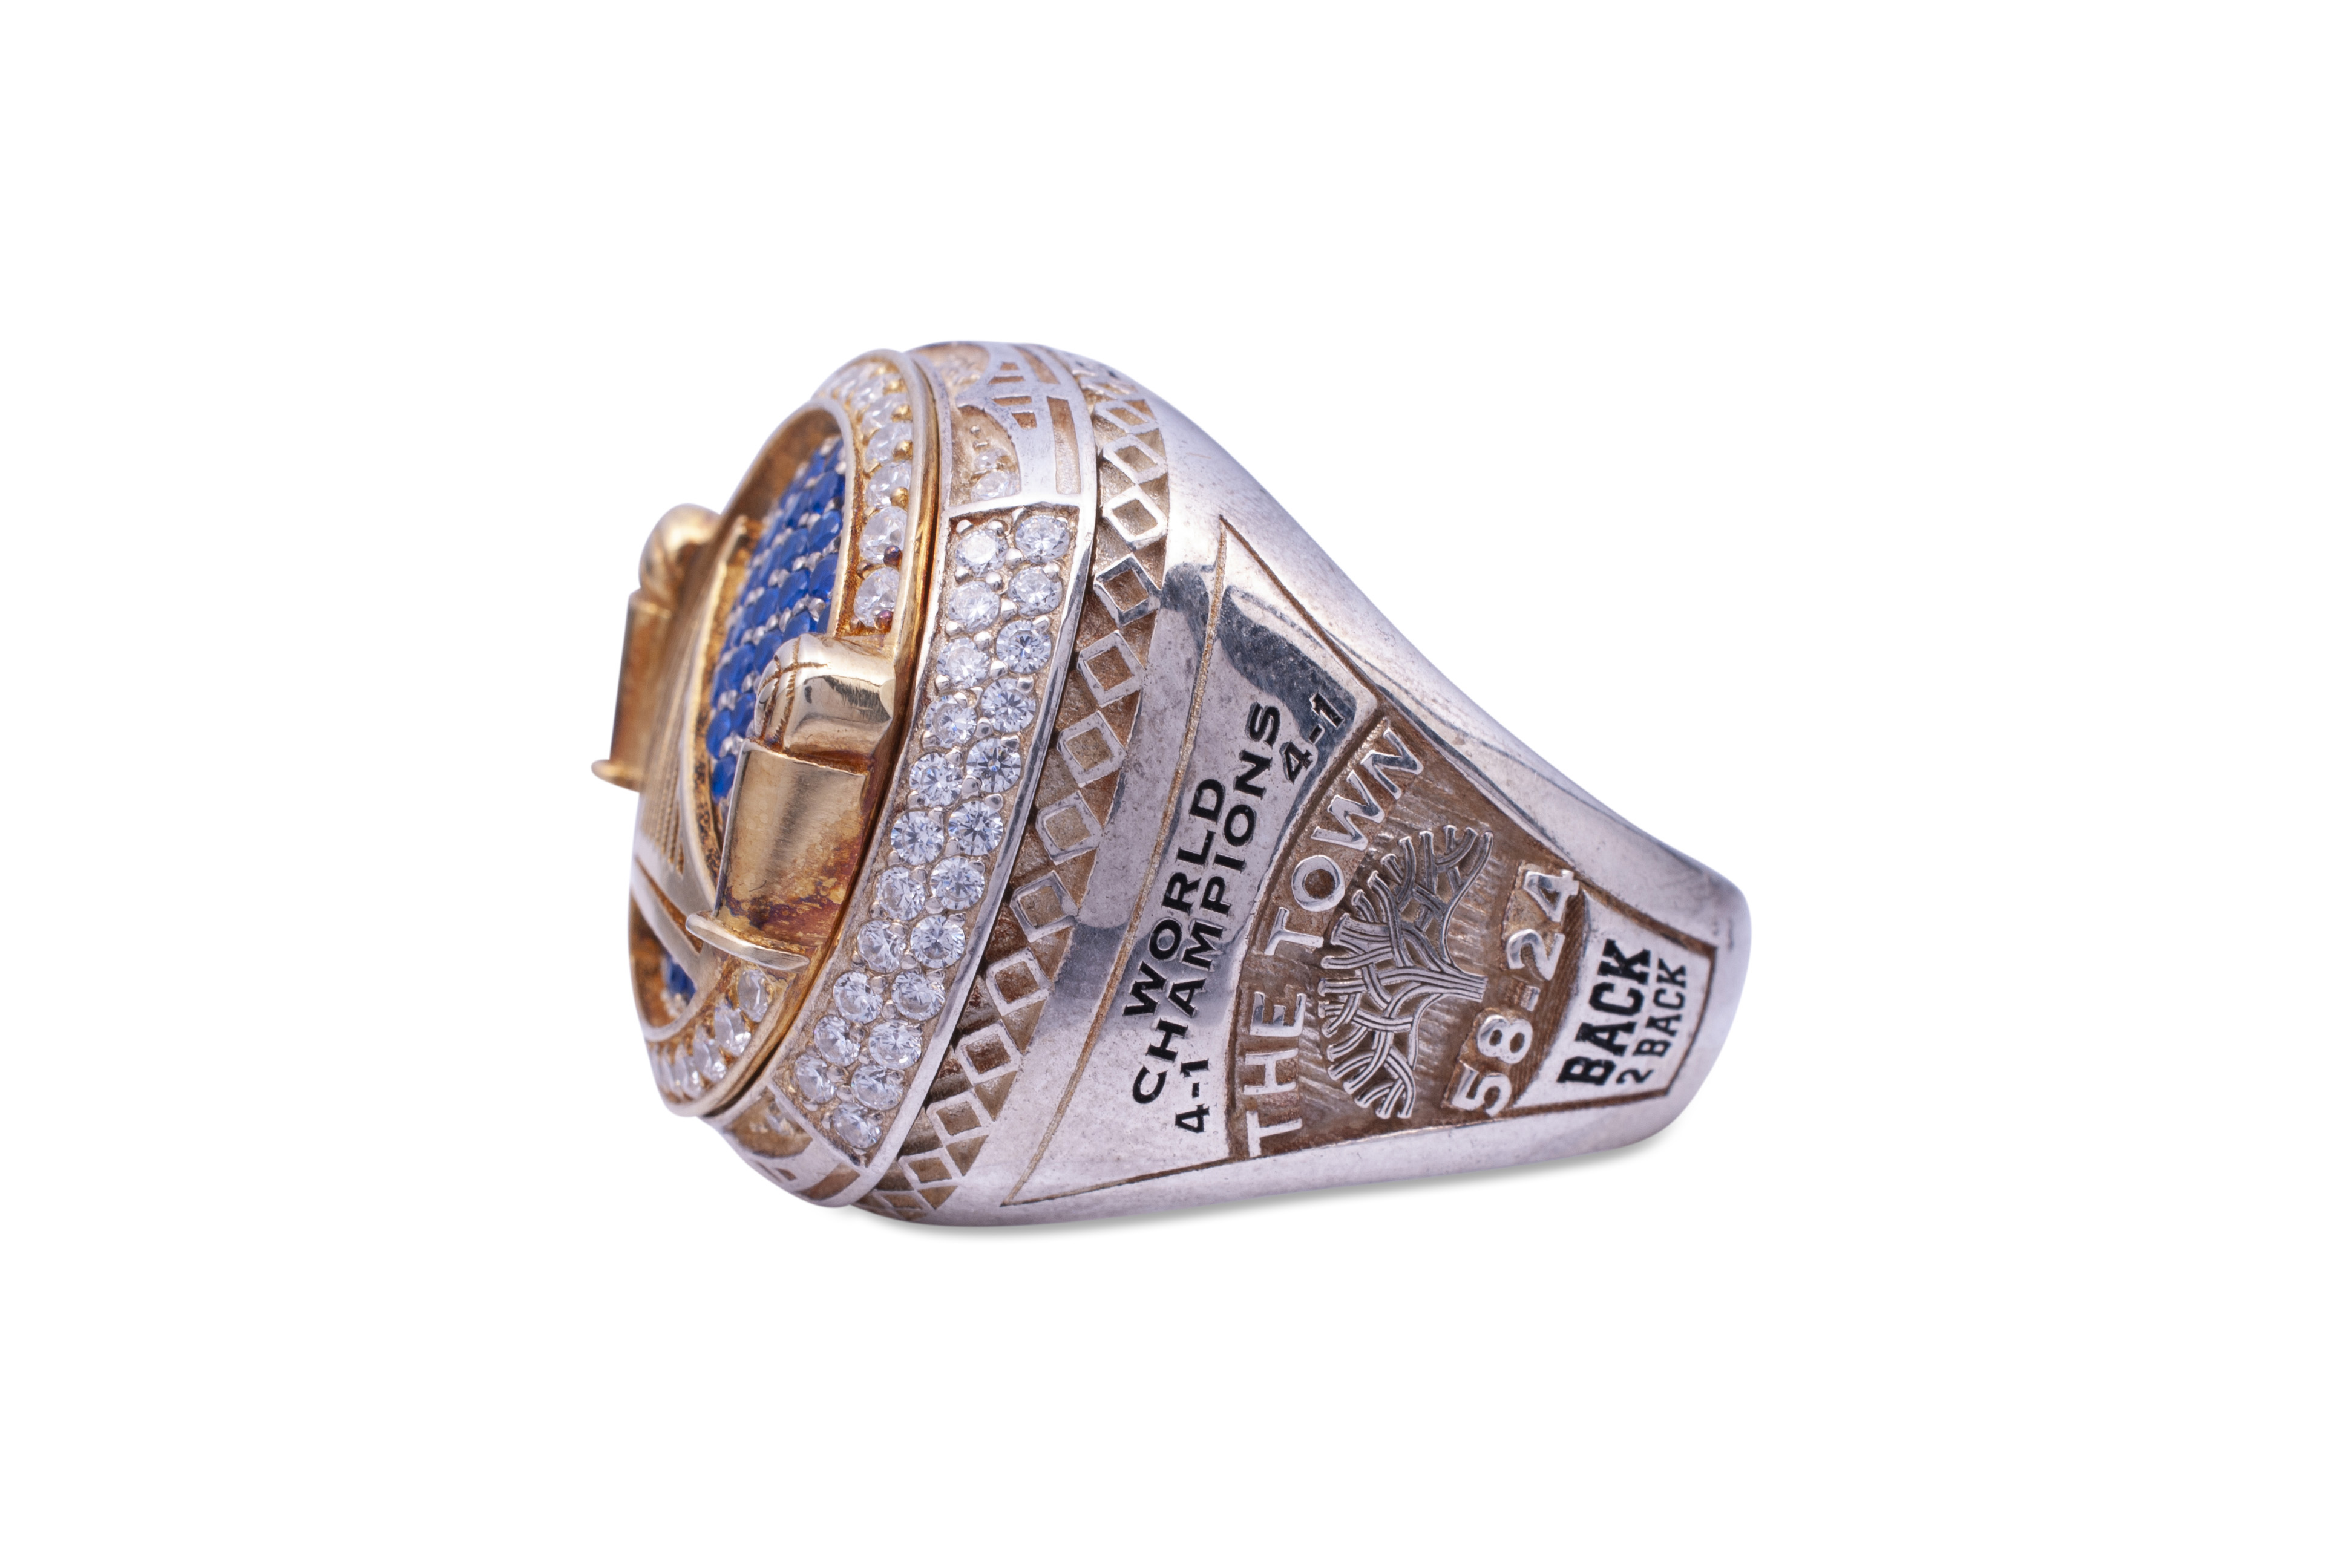 Warriors 2018 championship ring -- with a secret message